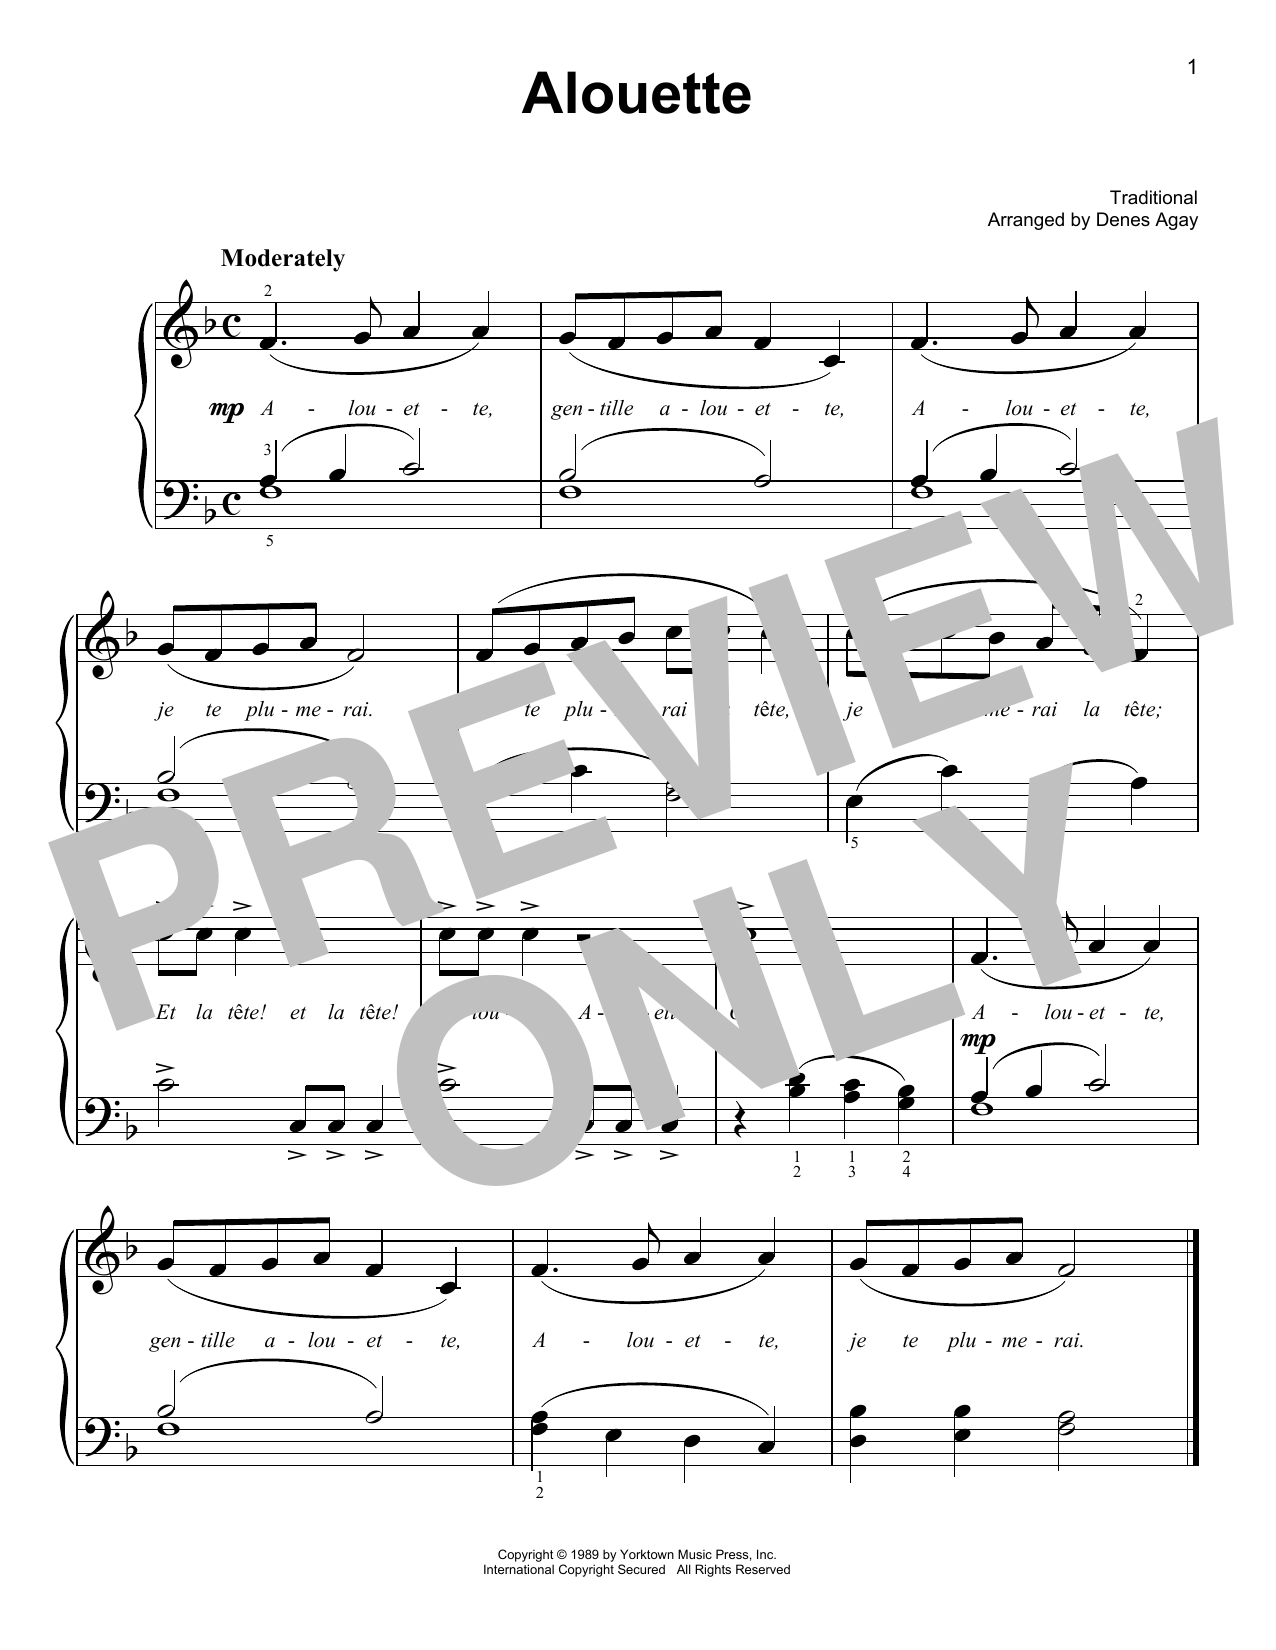 Download Traditional Alouette (arr. Denes Agay) Sheet Music